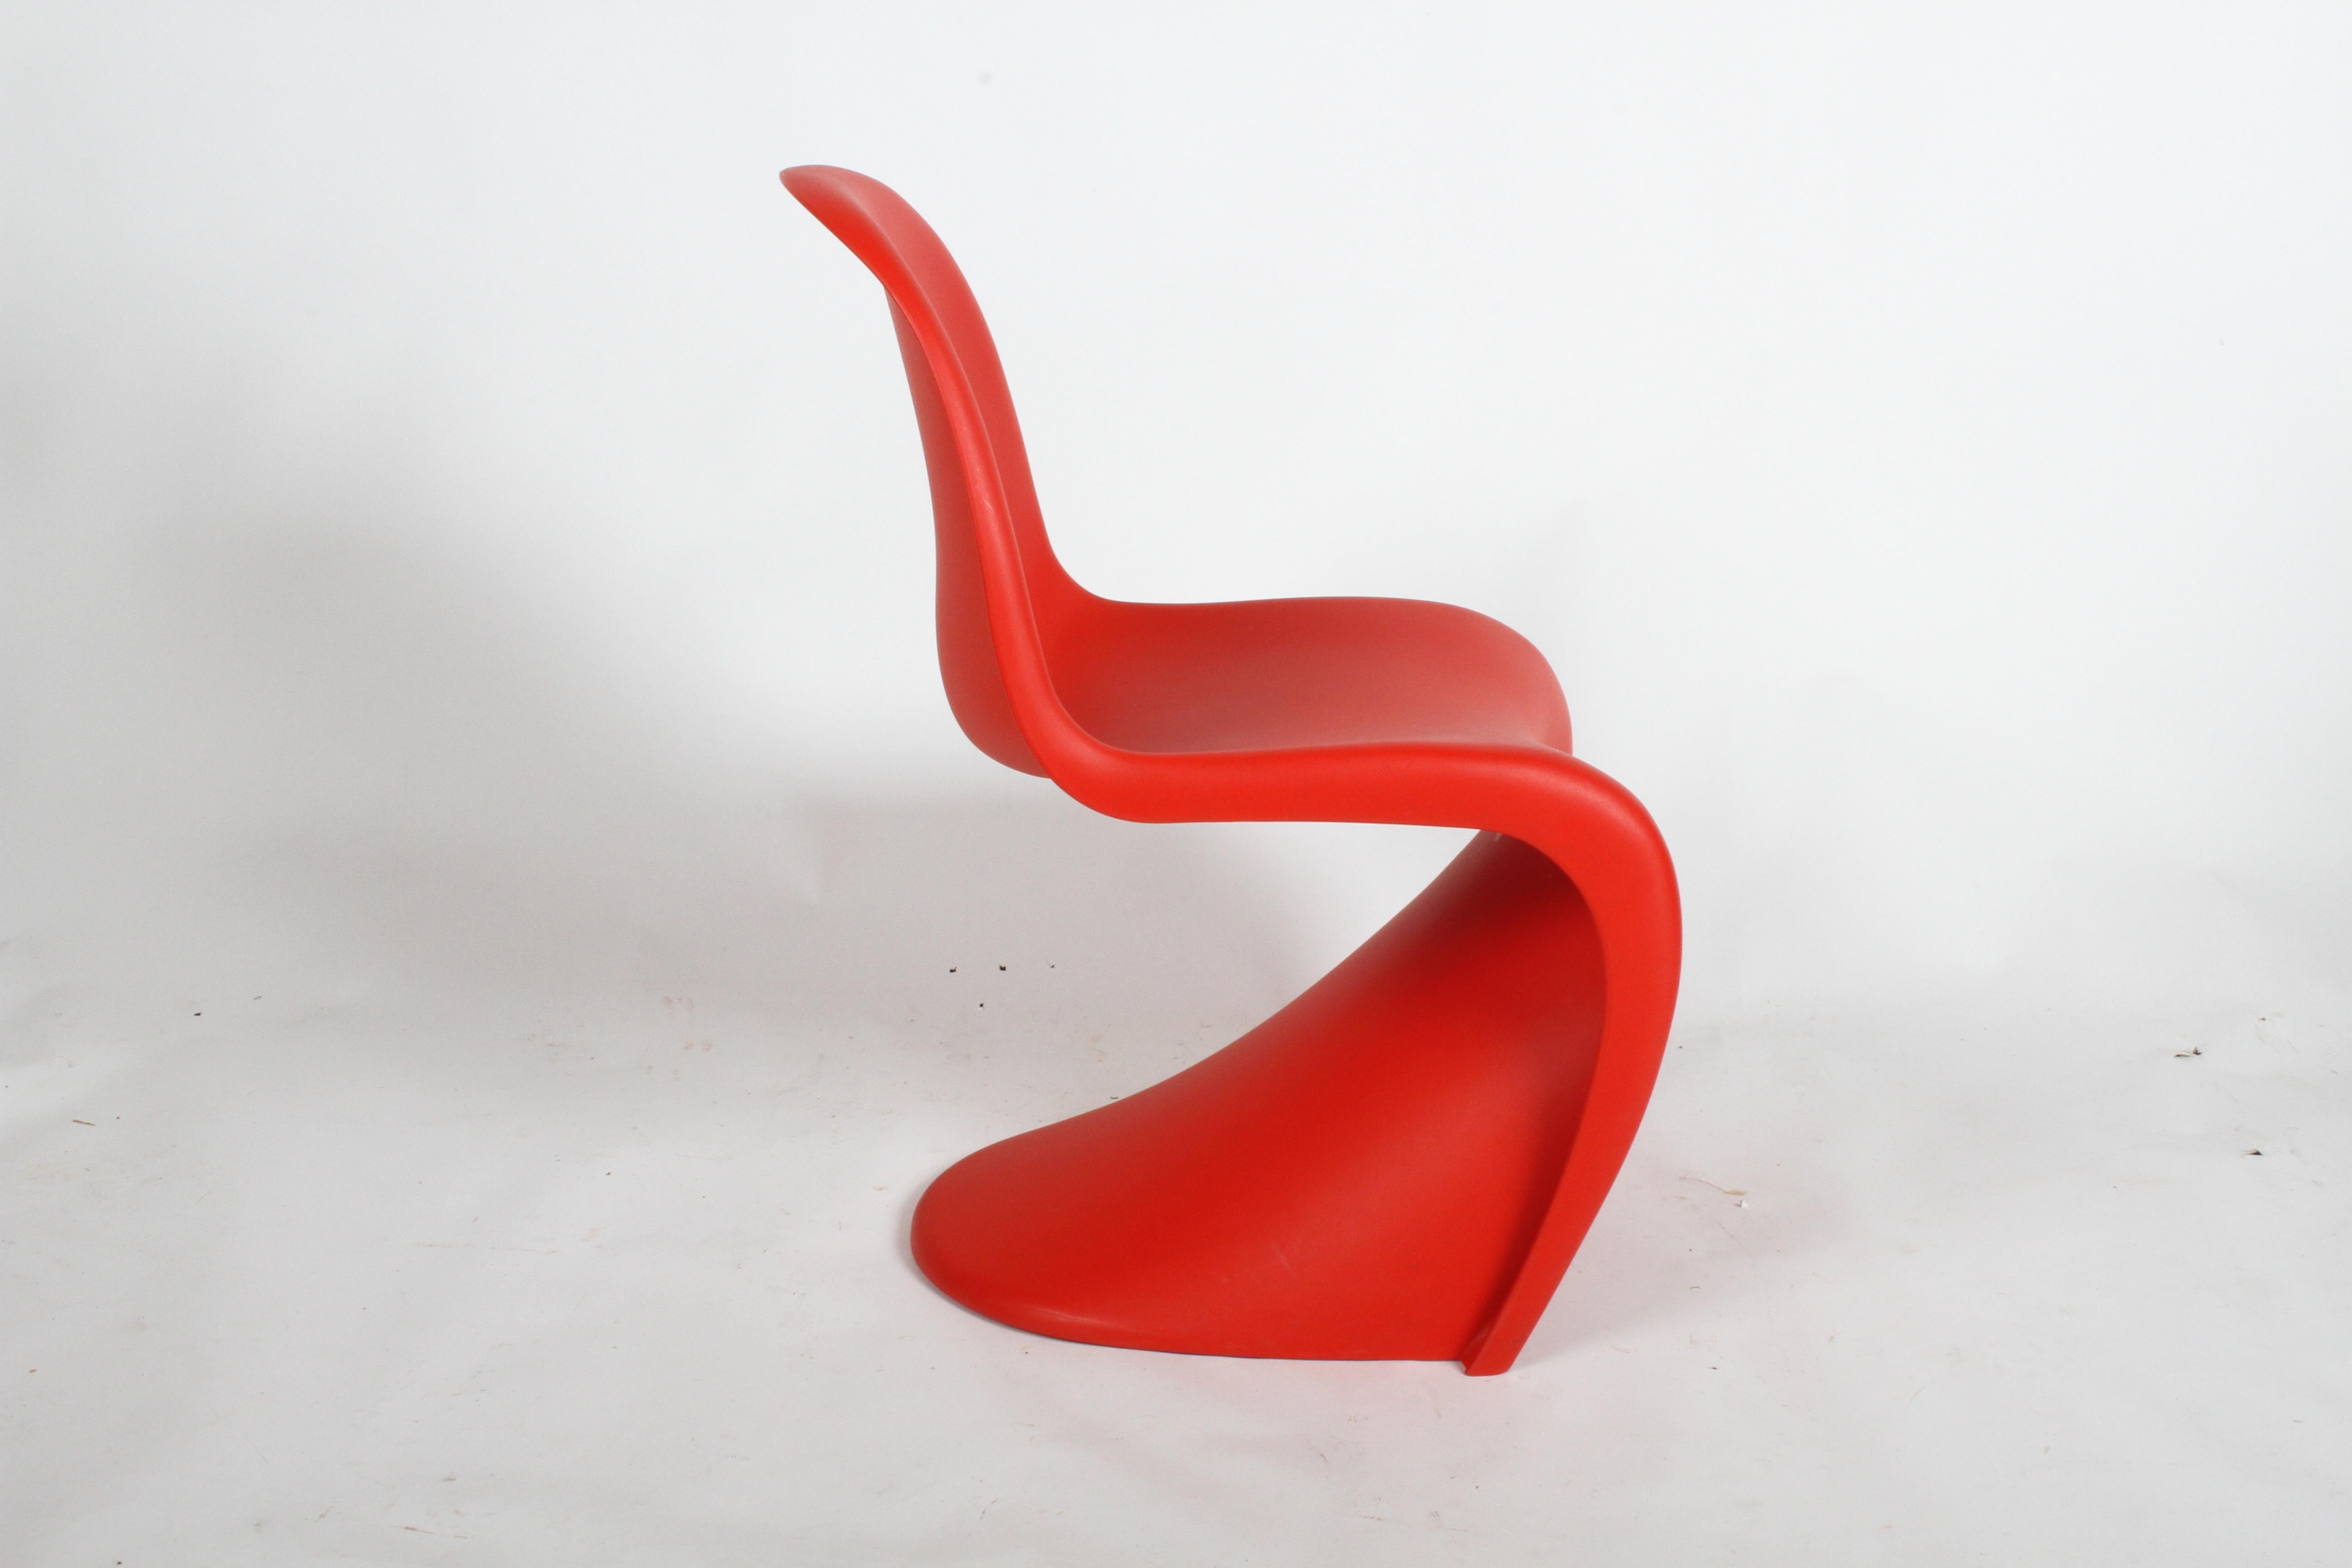 Swiss Classic Mid-Century Modern Verner Panton Chair in Red, Vitra Production